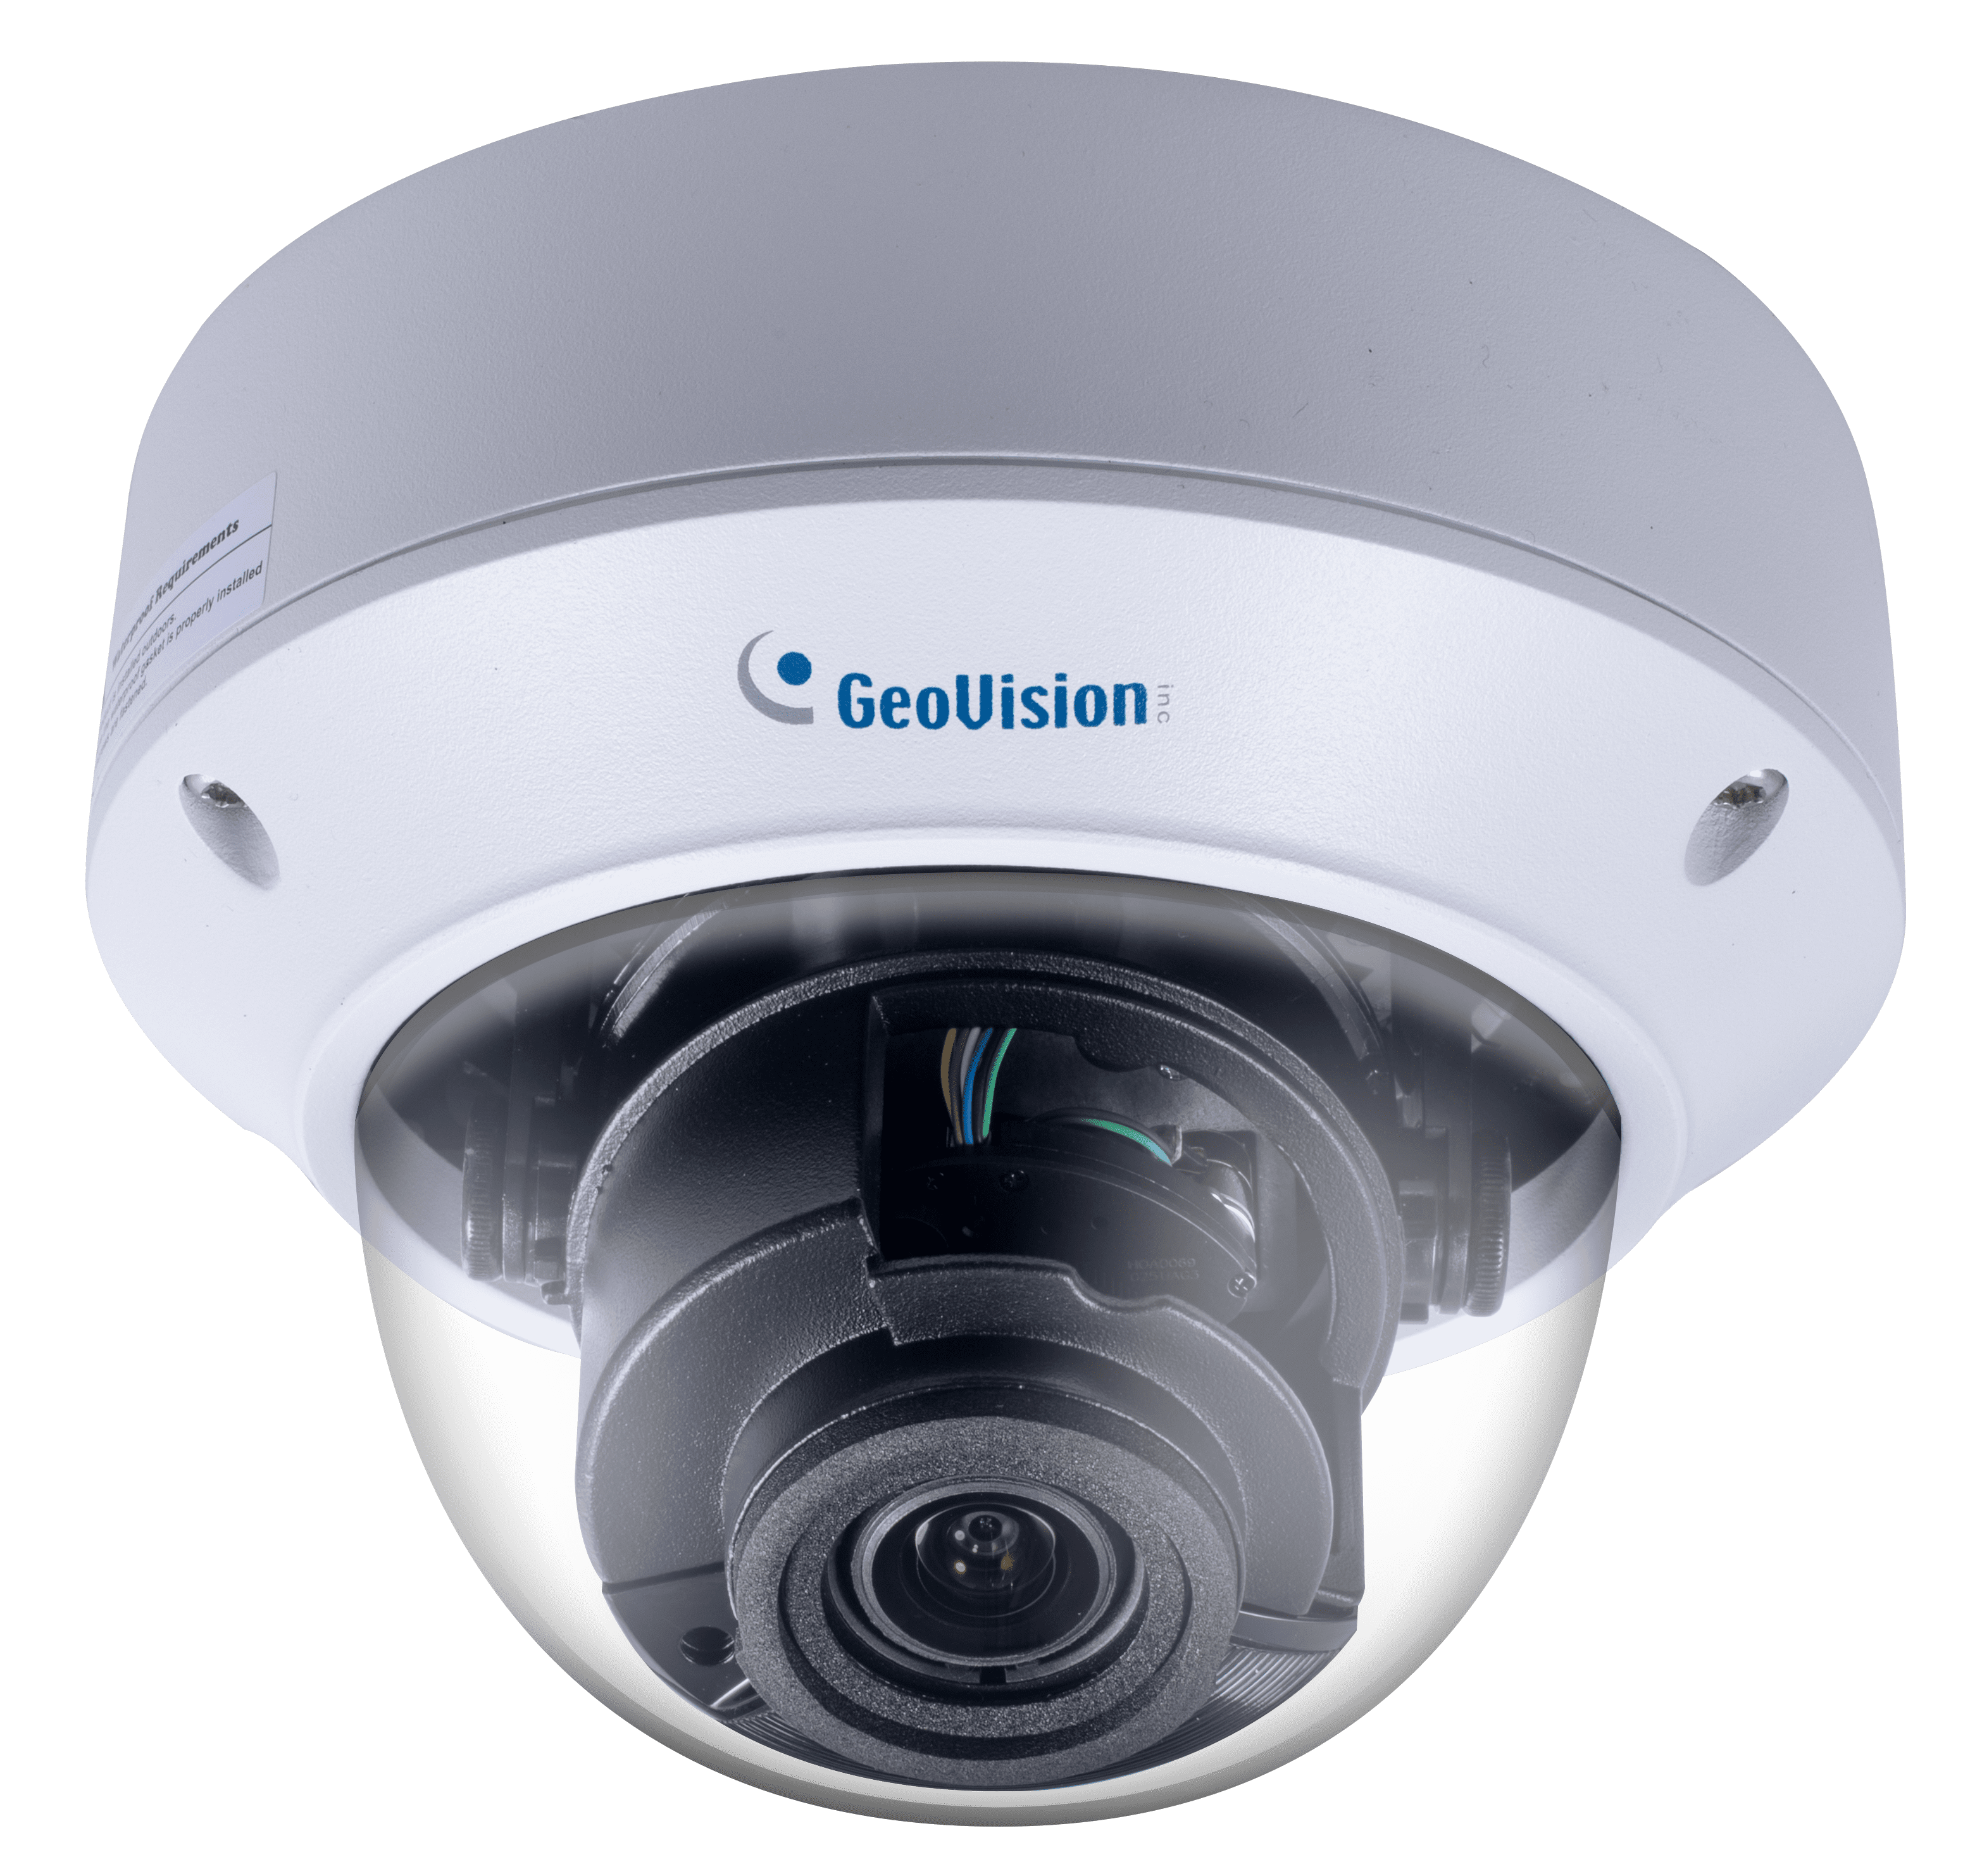 GeoVision GV-TVD8810 AI 8MP H.265 4.3X Zoom Super Low Lux WDR Pro IR Vandal Proof IP Dome